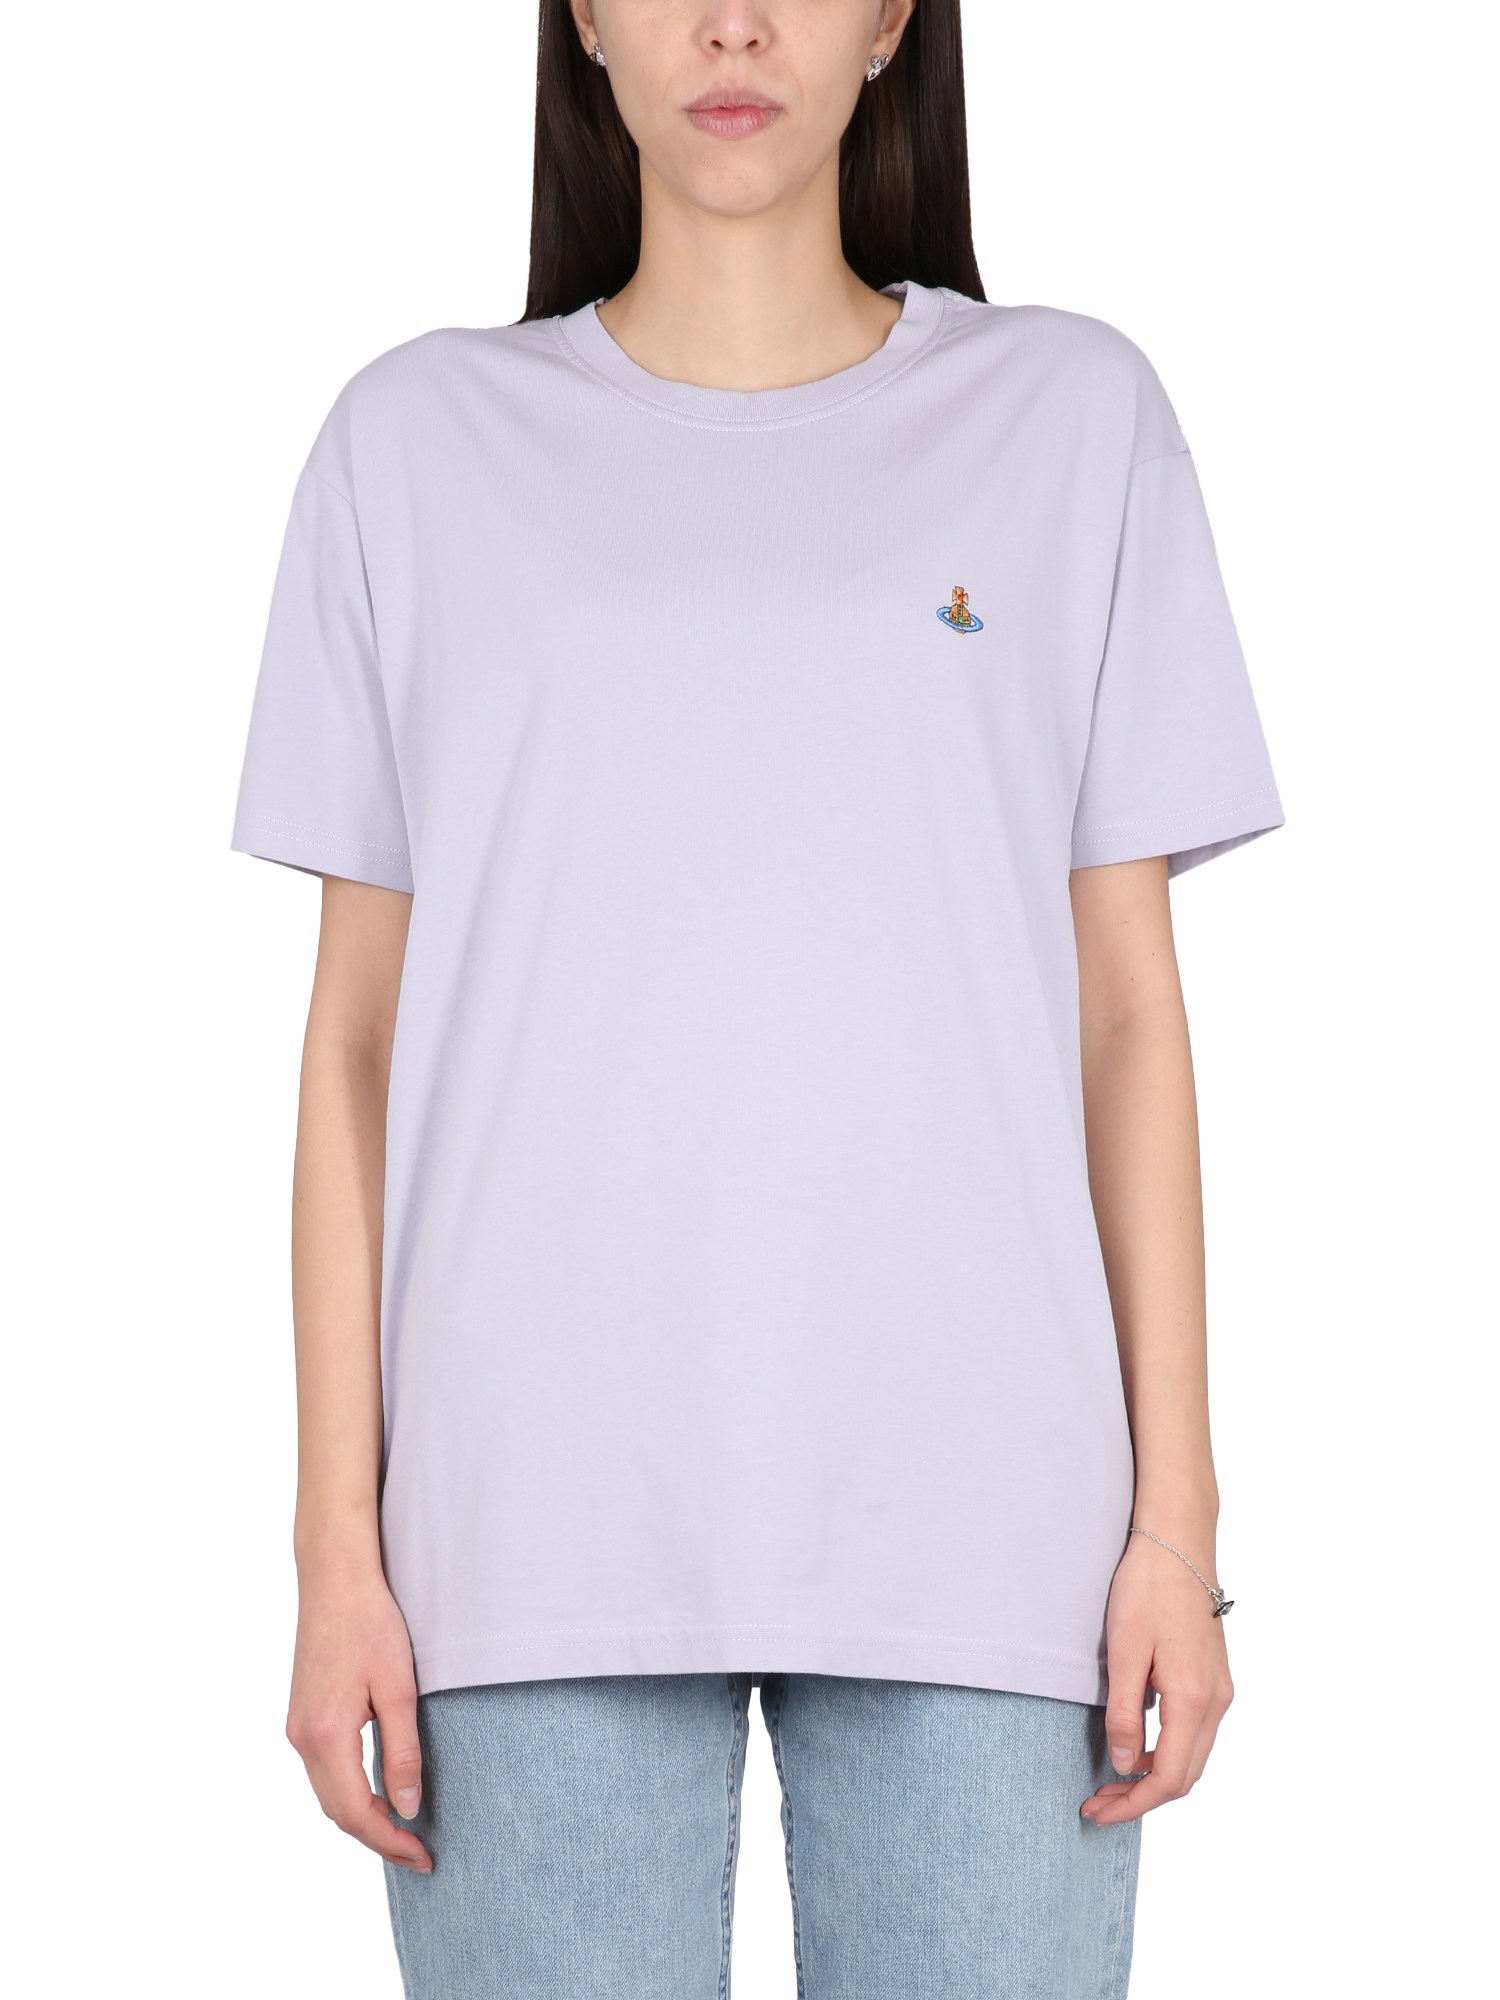 VIVIENNE WESTWOOD T-SHIRT WITH ORB EMBROIDERY 